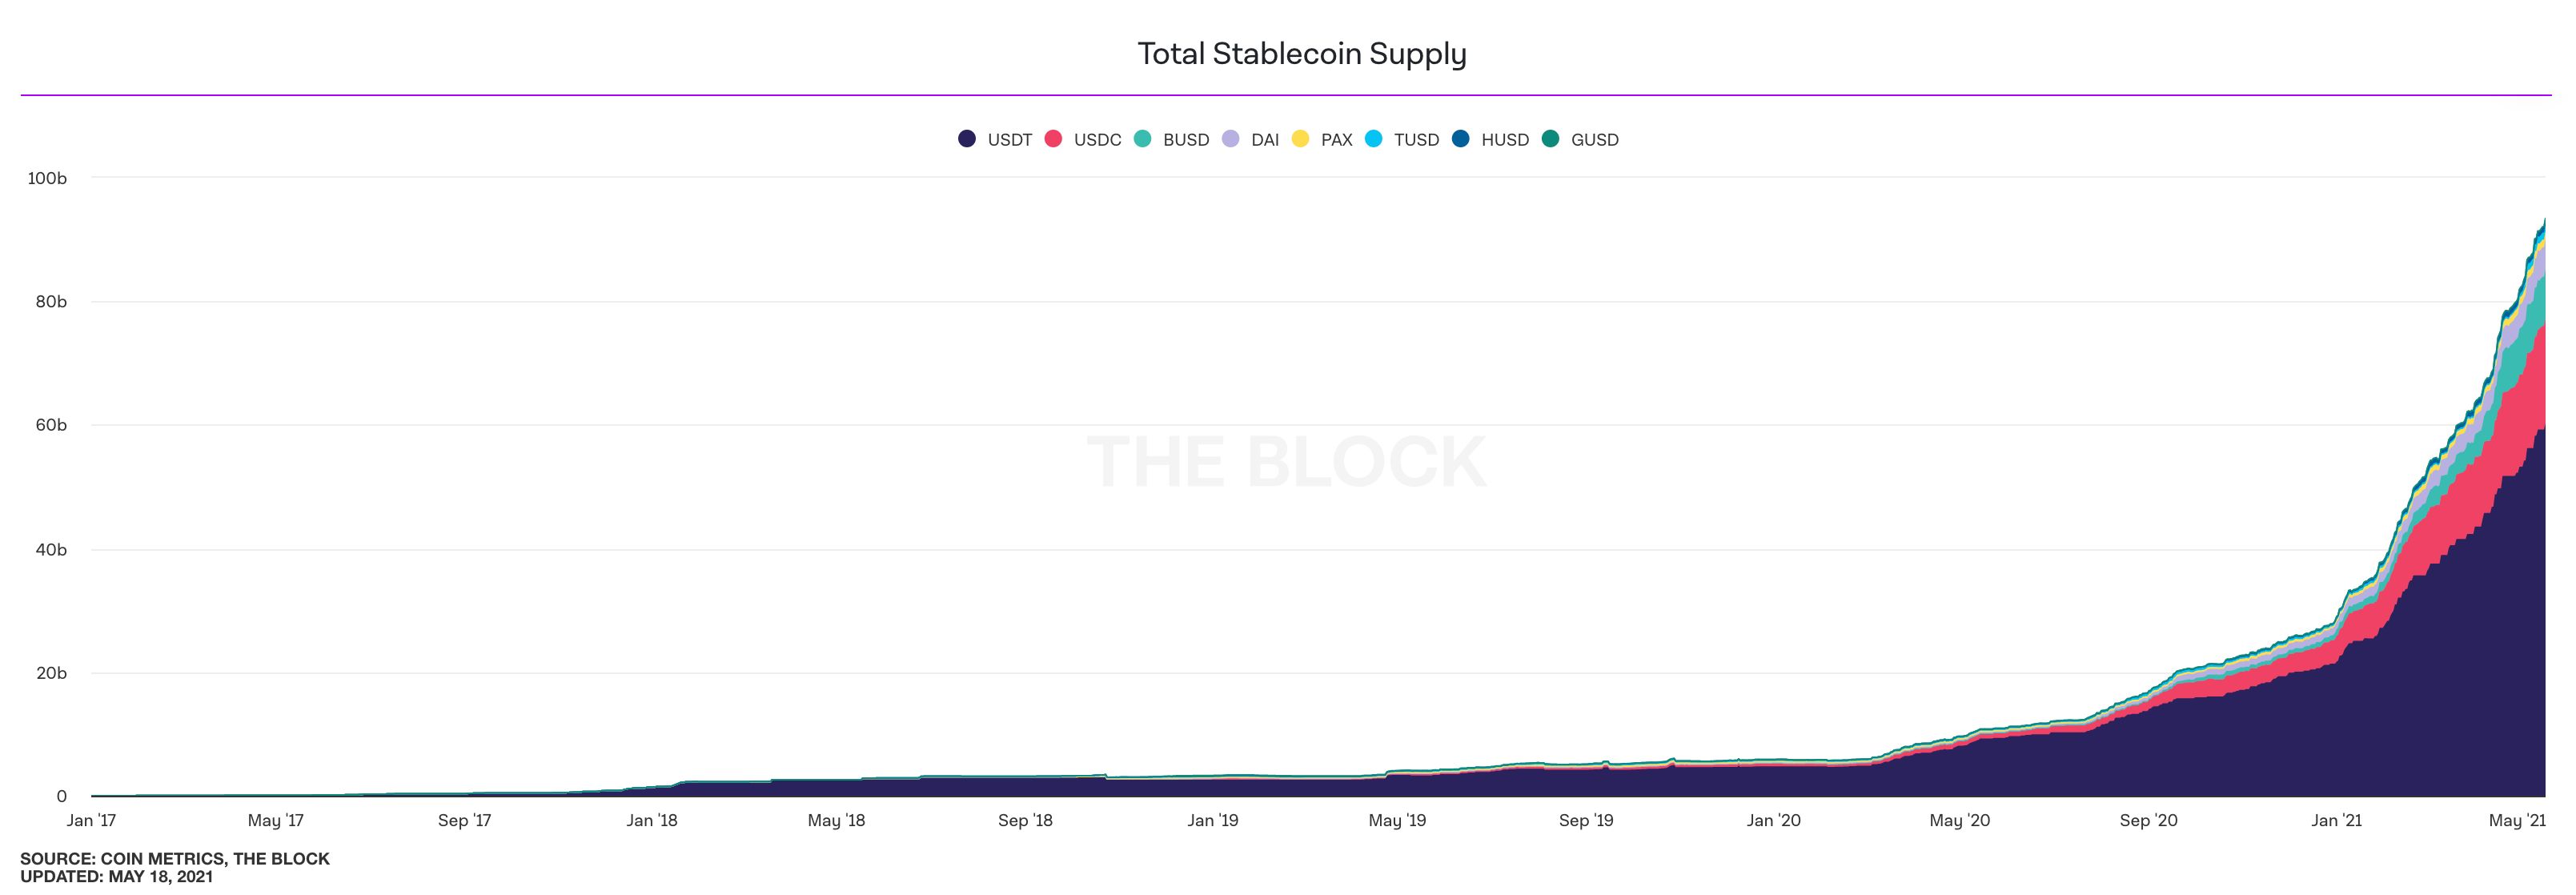 Total Stablecoin Suppy